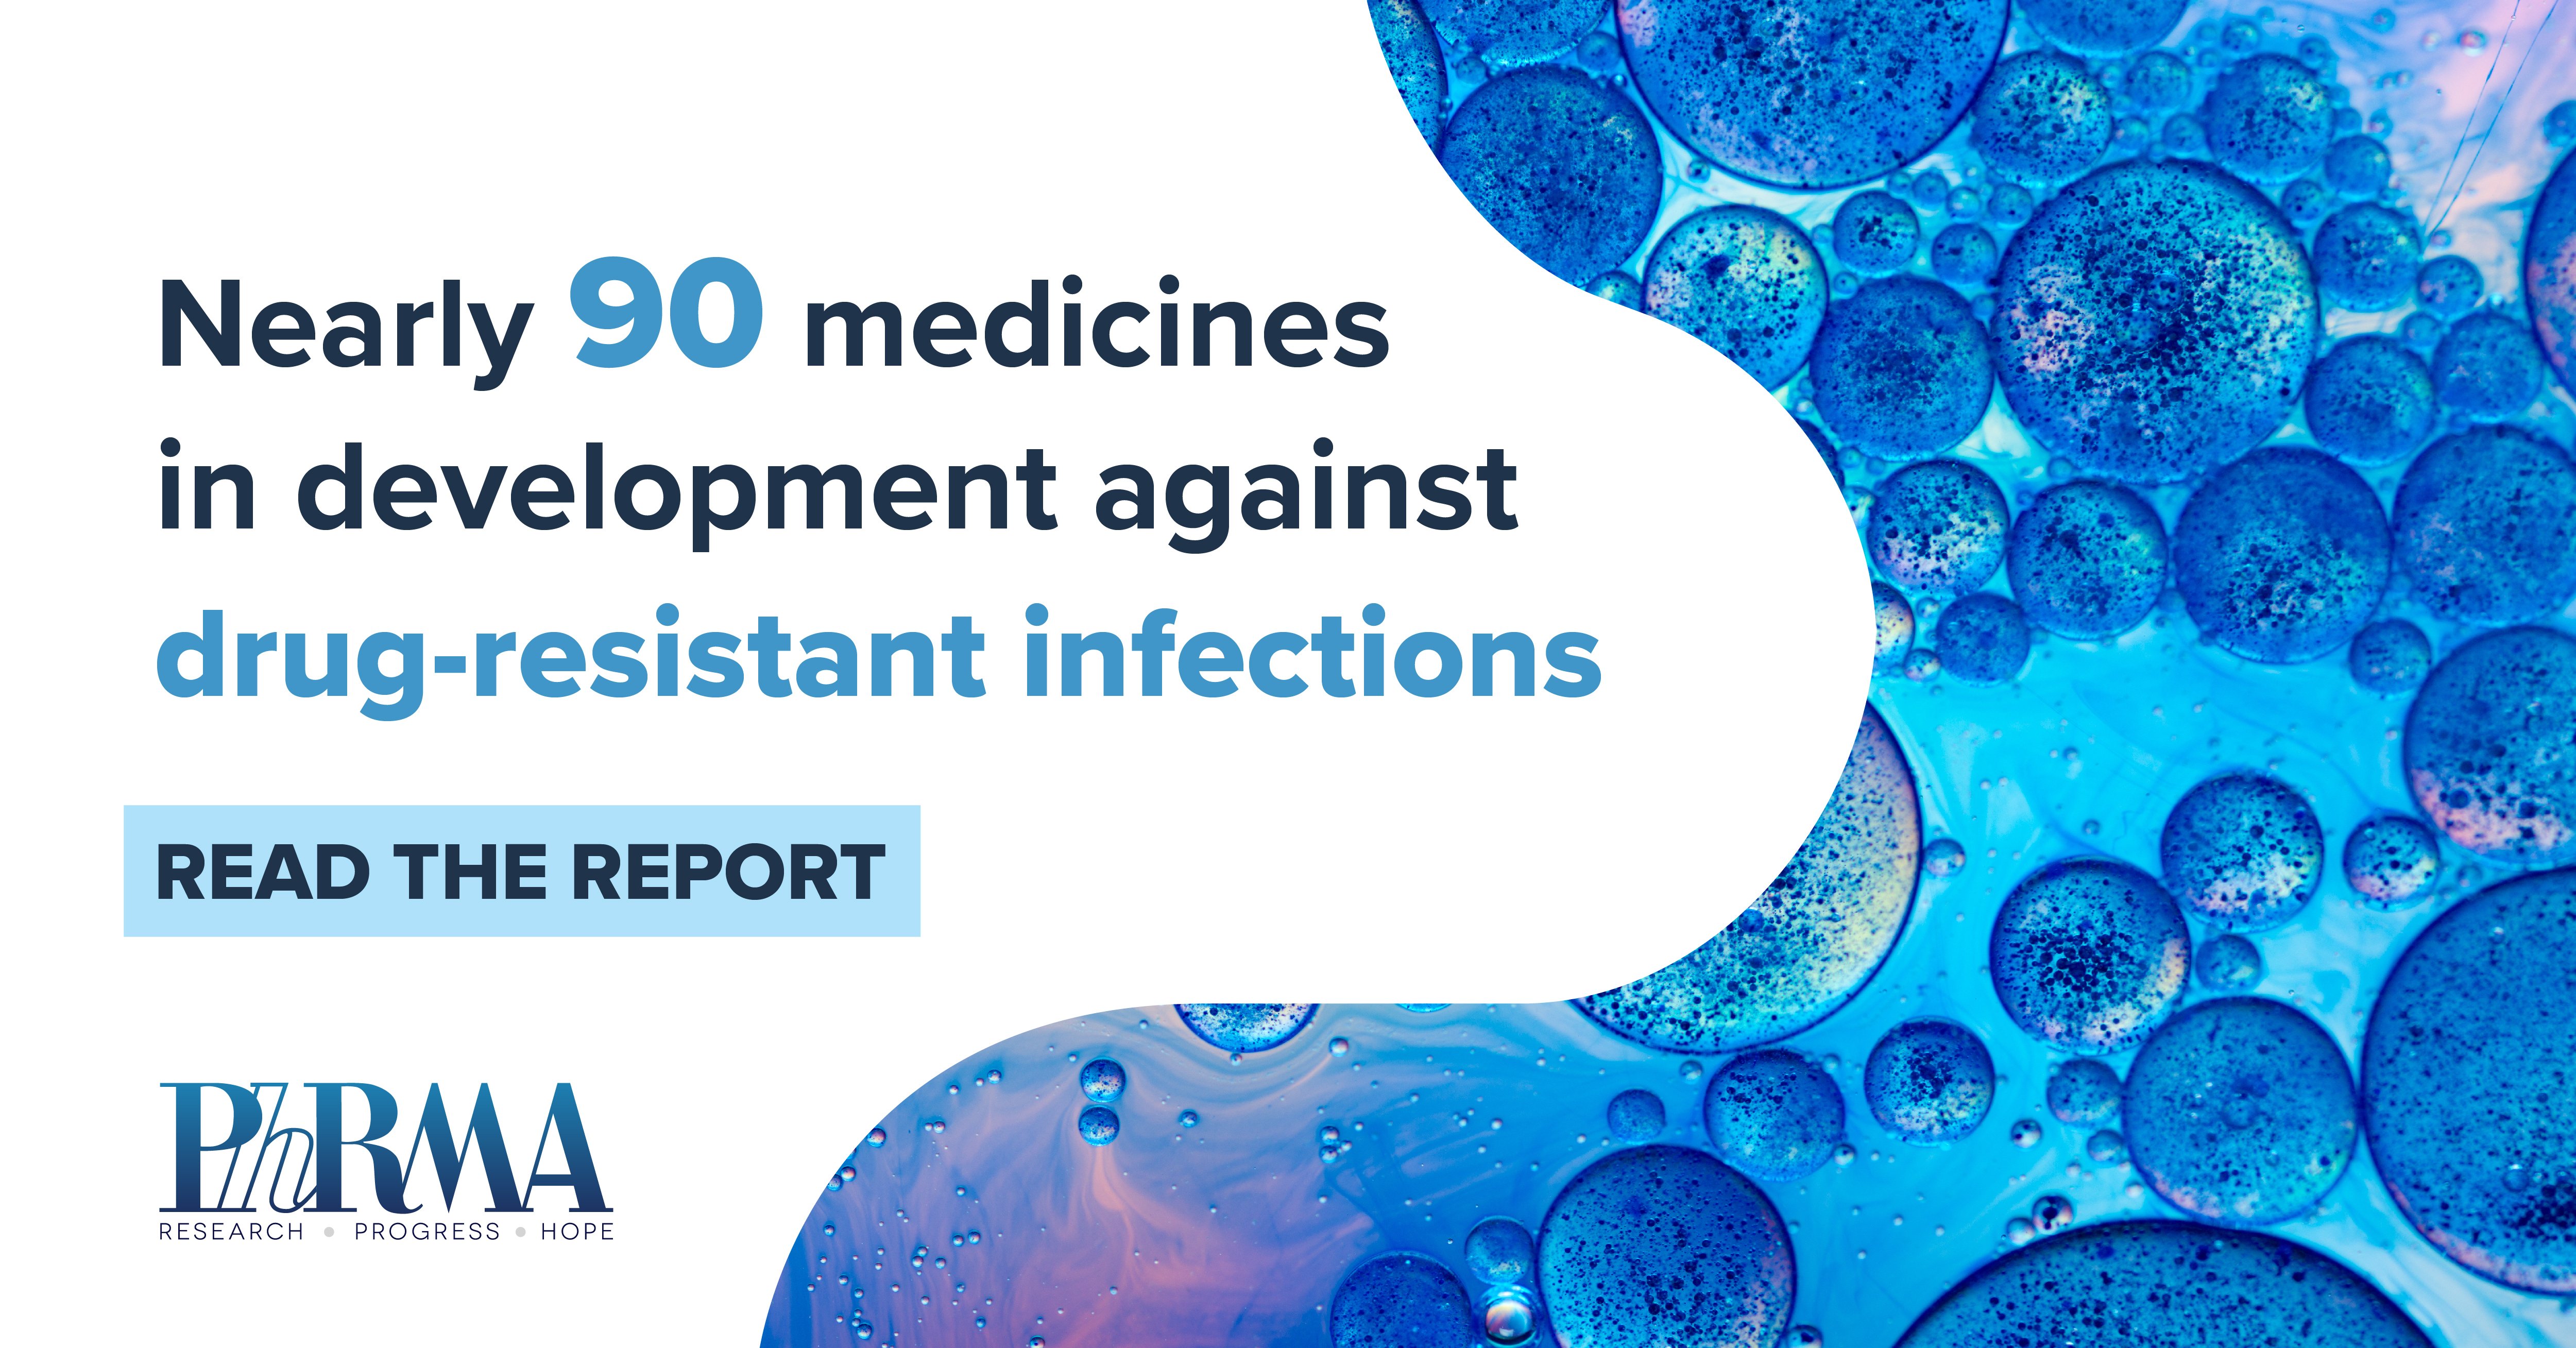 new-phrma-report-shows-nearly-90-medicines-in-development-to-fight-drug-resistant-infections-but-future-pipeline-remains-challenging